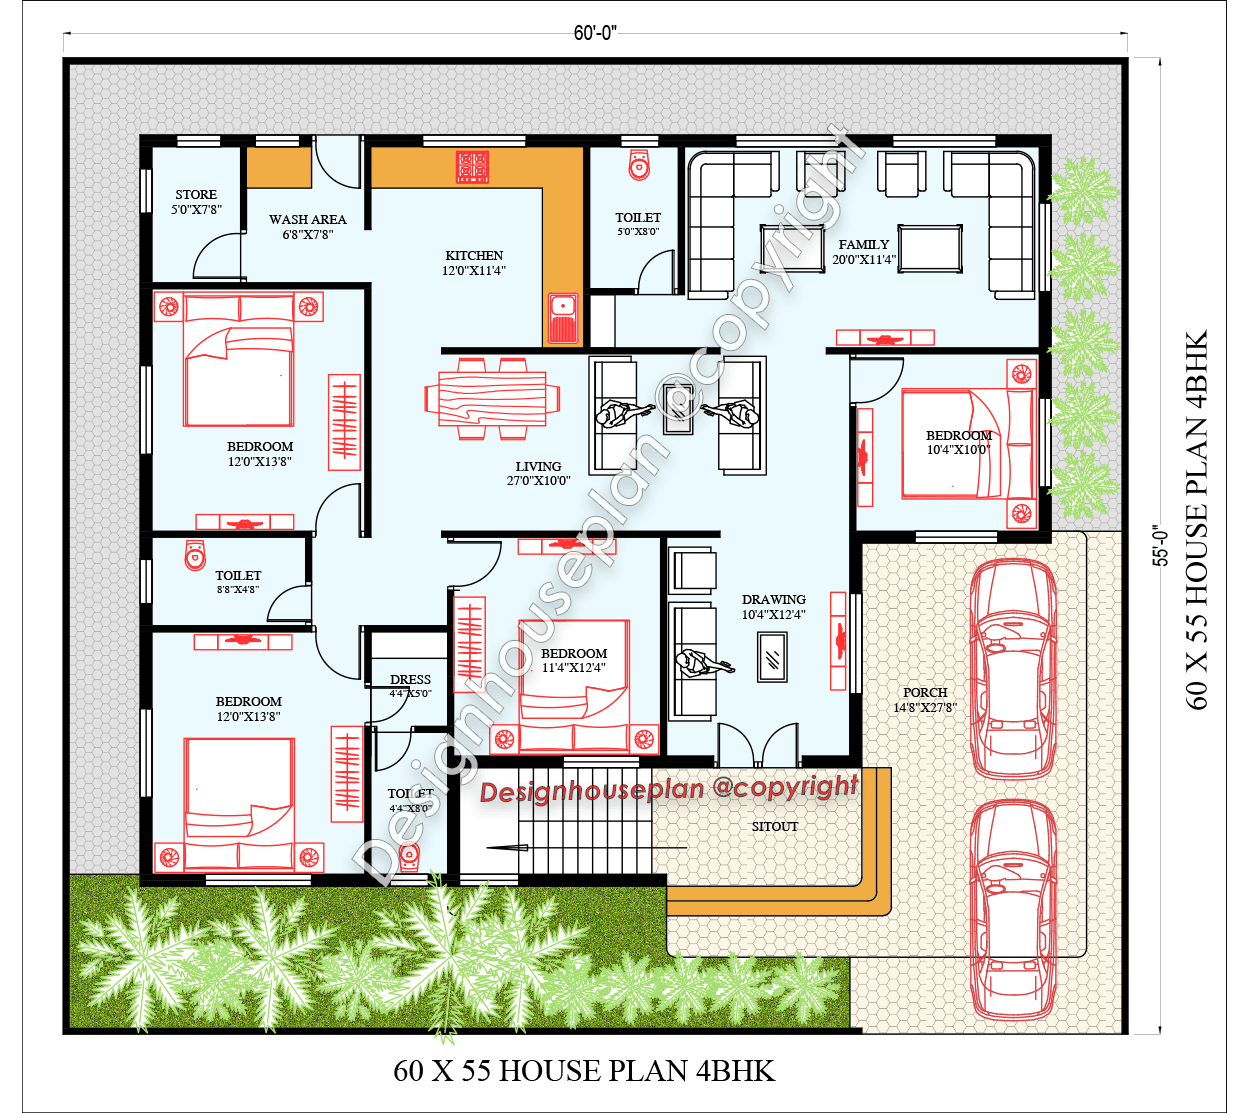 60x55 affordable house design